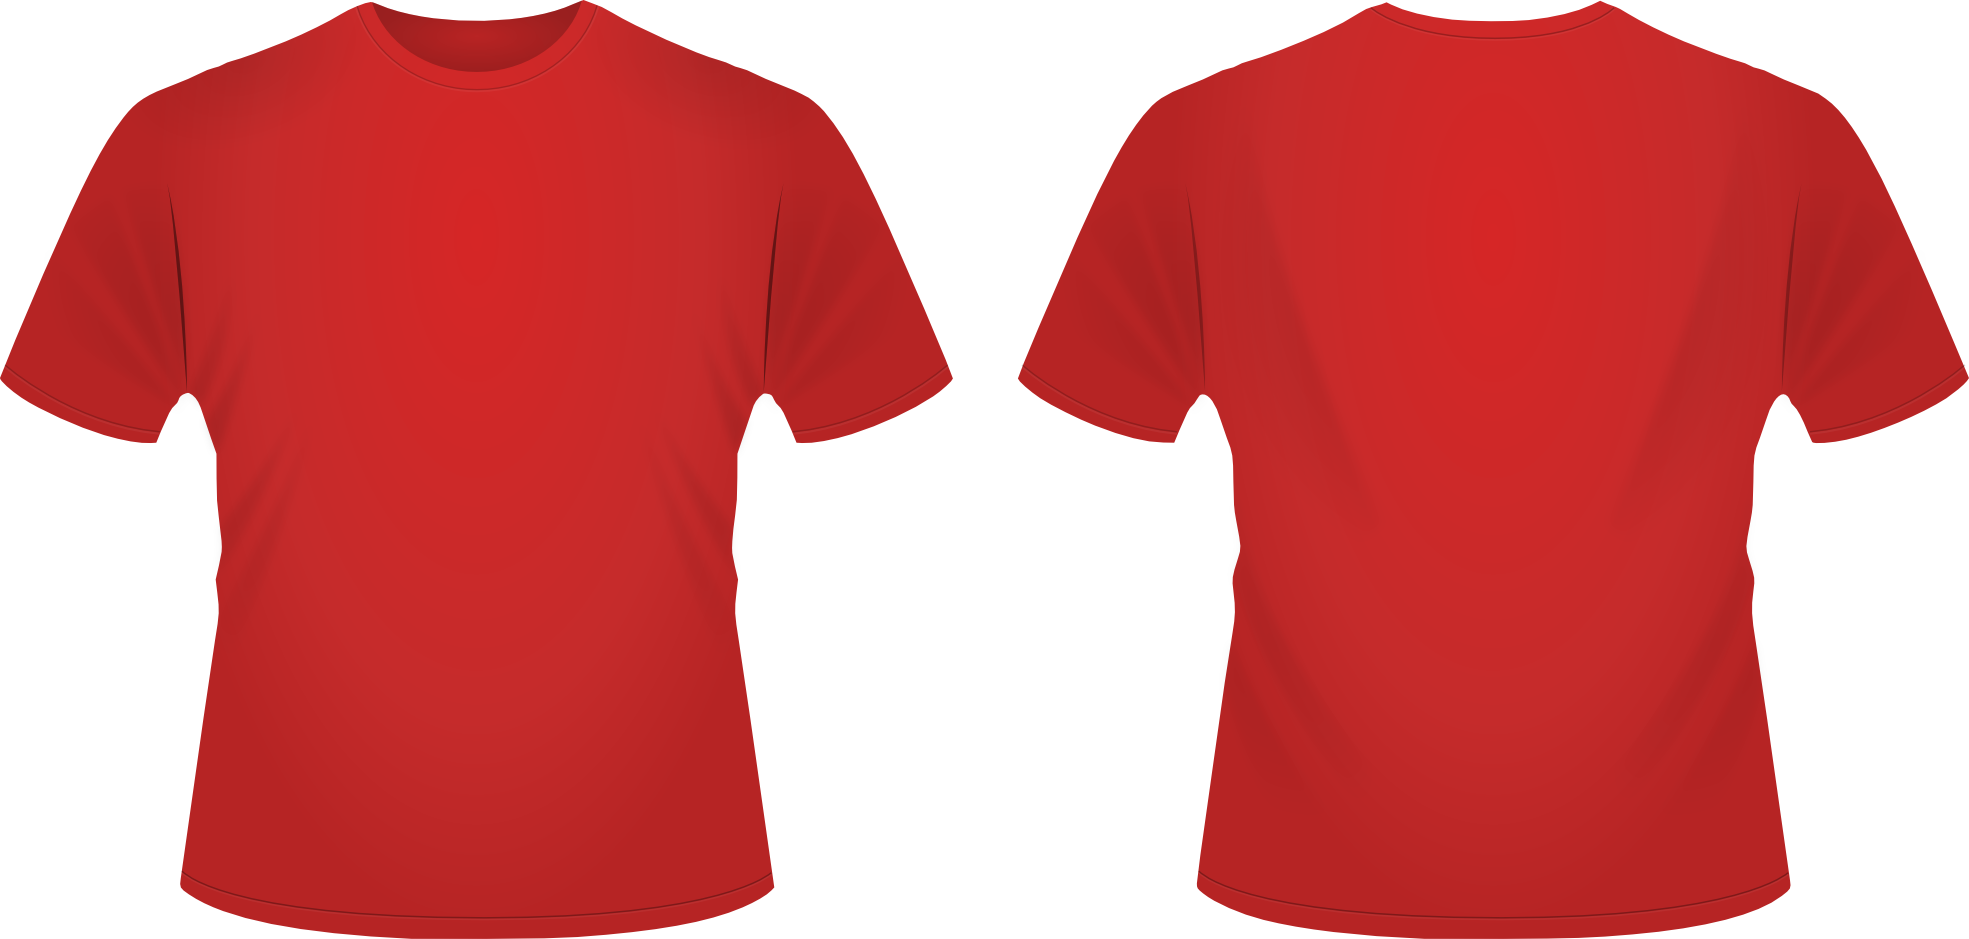 T Shirt SVG by DanRabbit on Clipart library